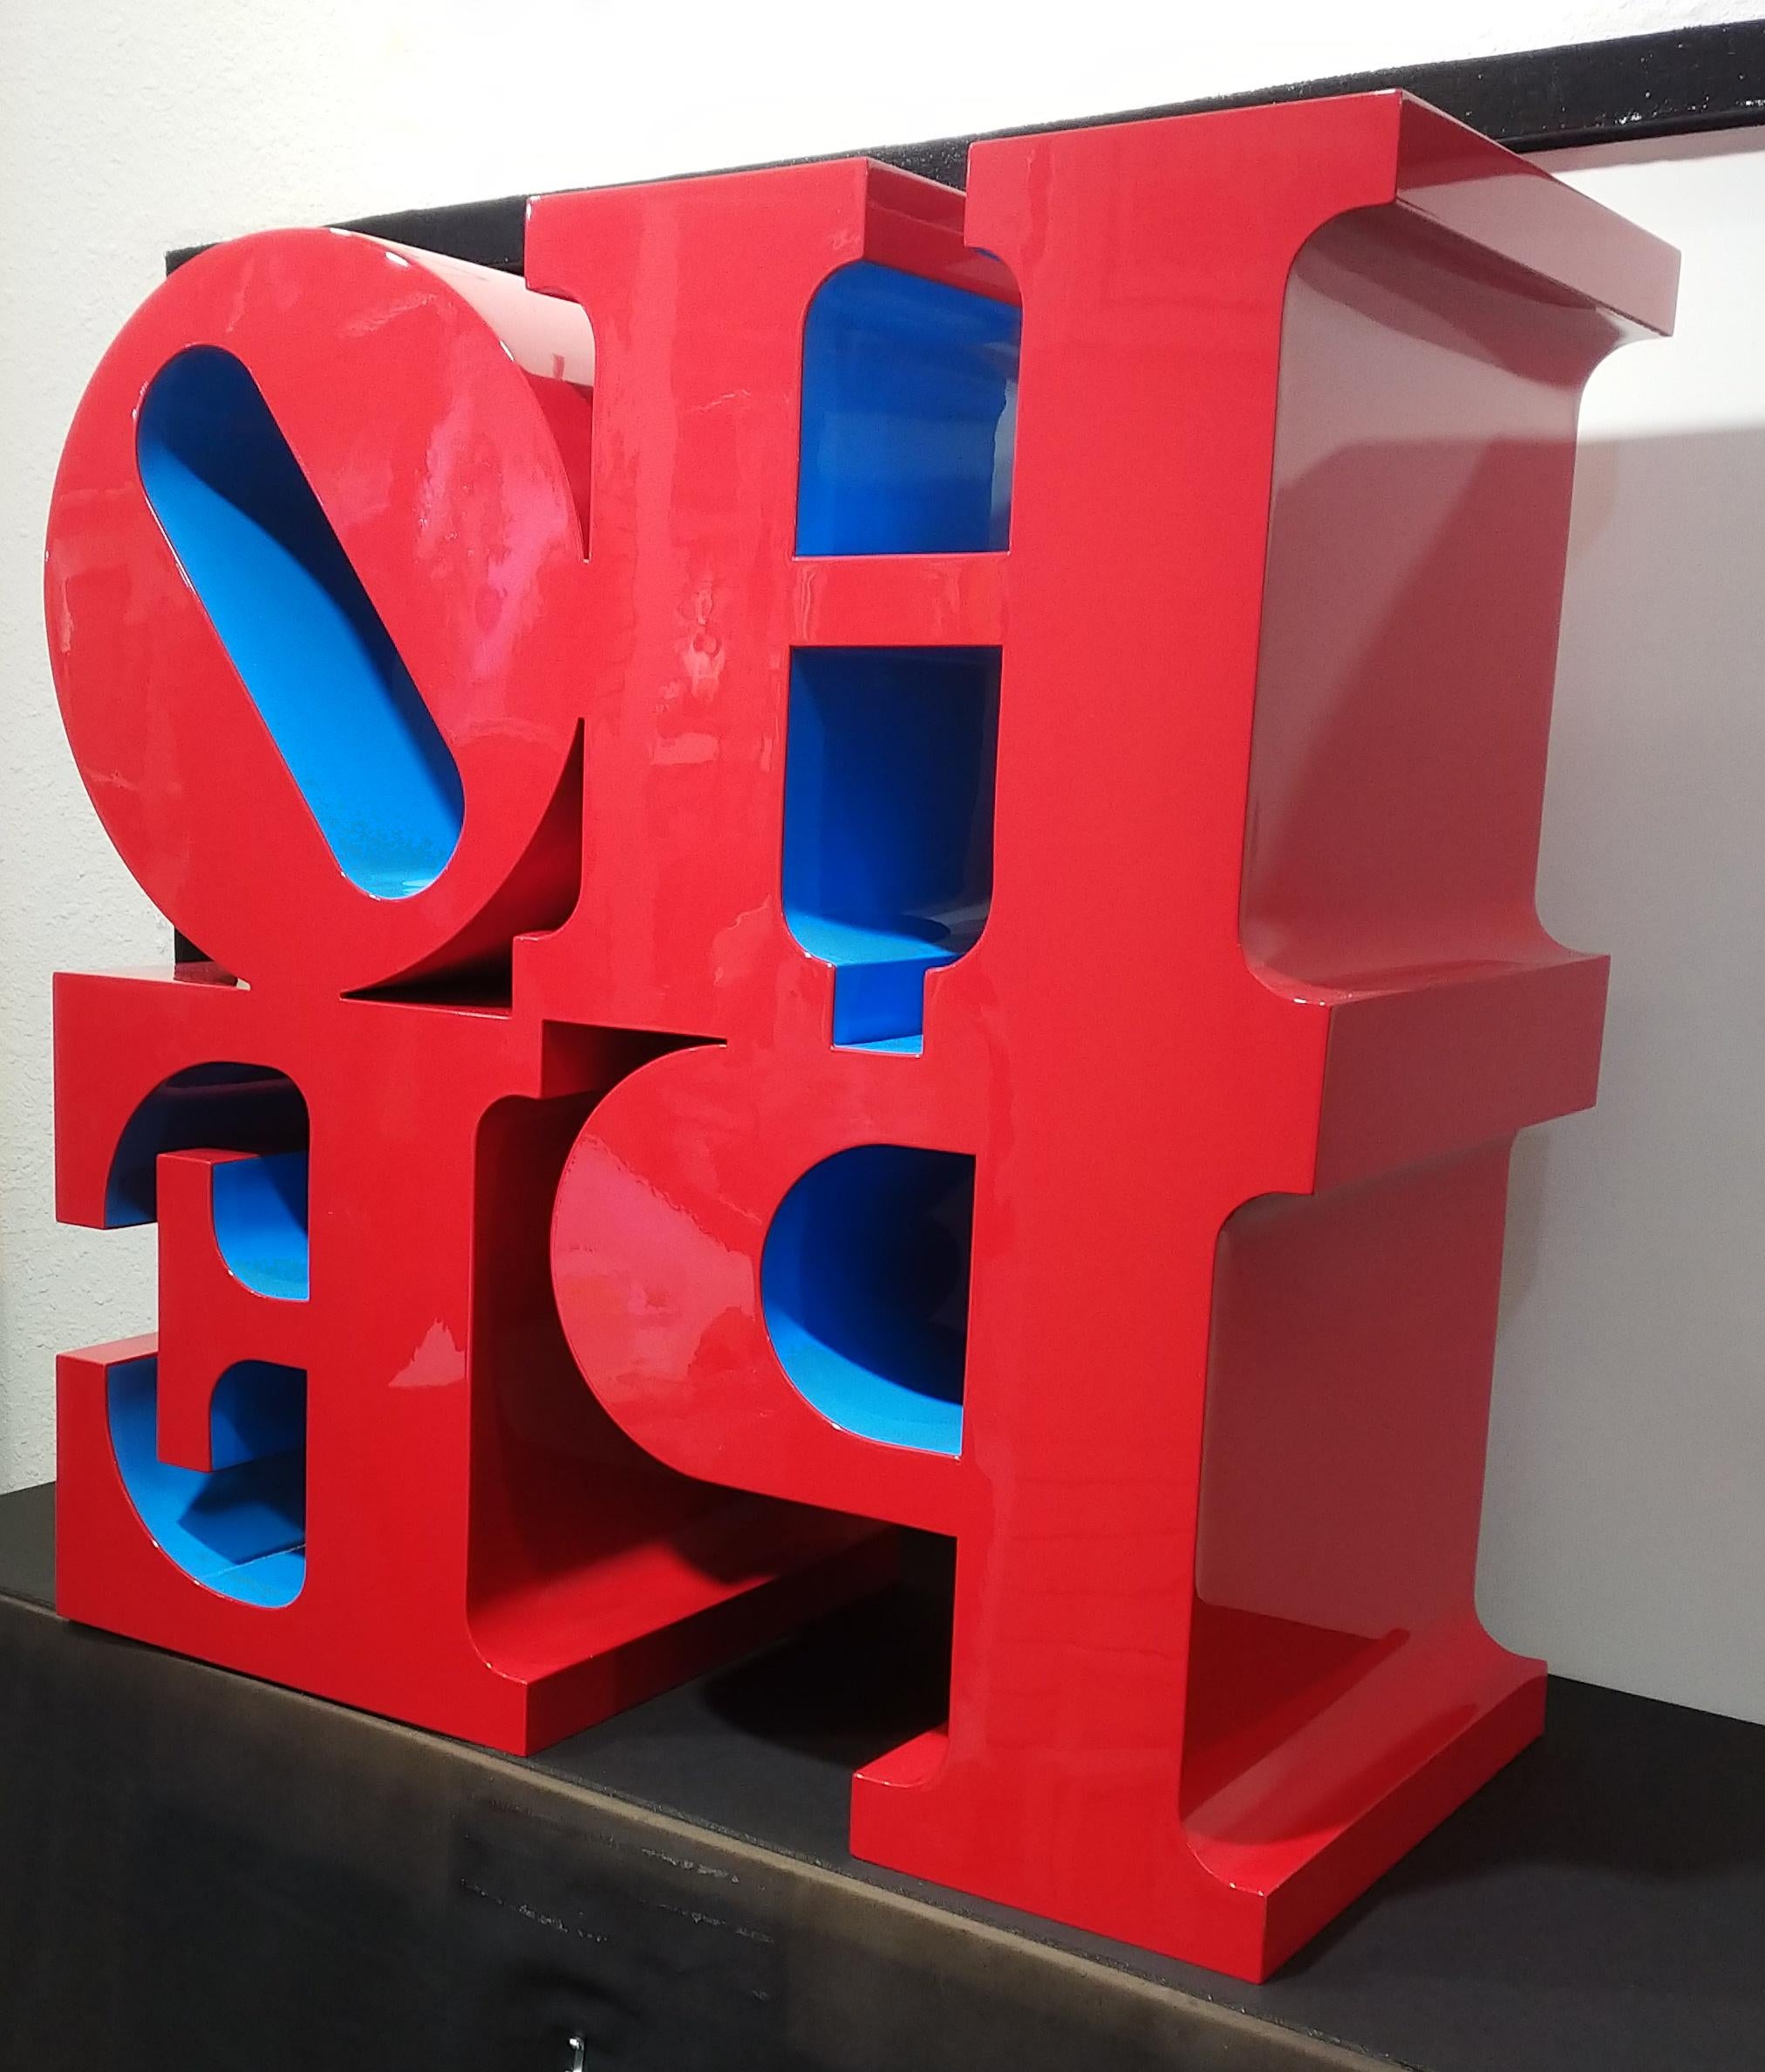 robert indiana hope red/blue